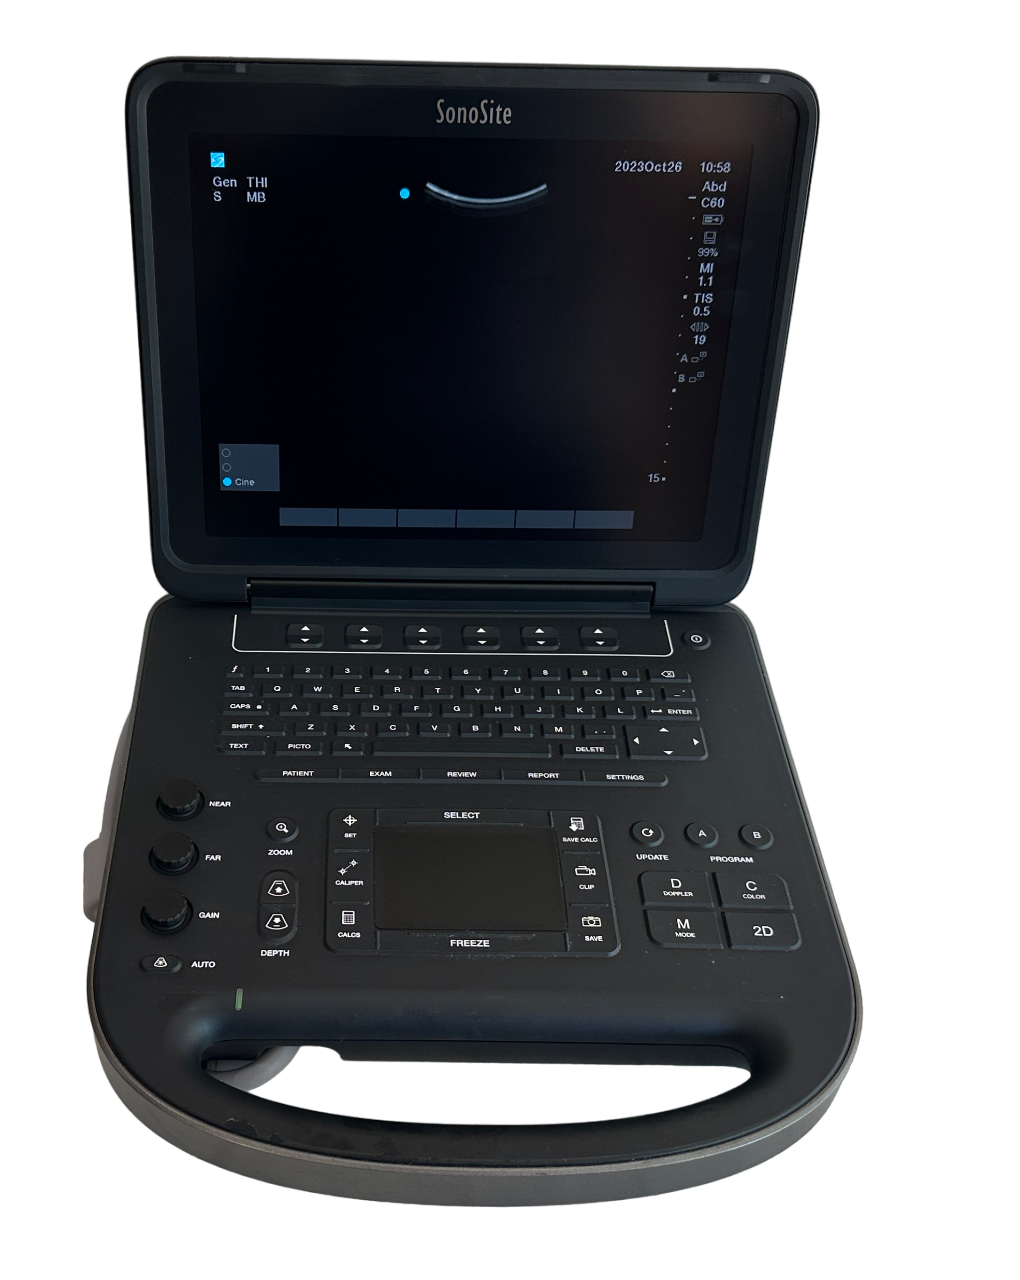 Sonosite Edge II Ultrasound 2017/Color, DICOM, with Two Probes L38xi & rC60Xi DIAGNOSTIC ULTRASOUND MACHINES FOR SALE